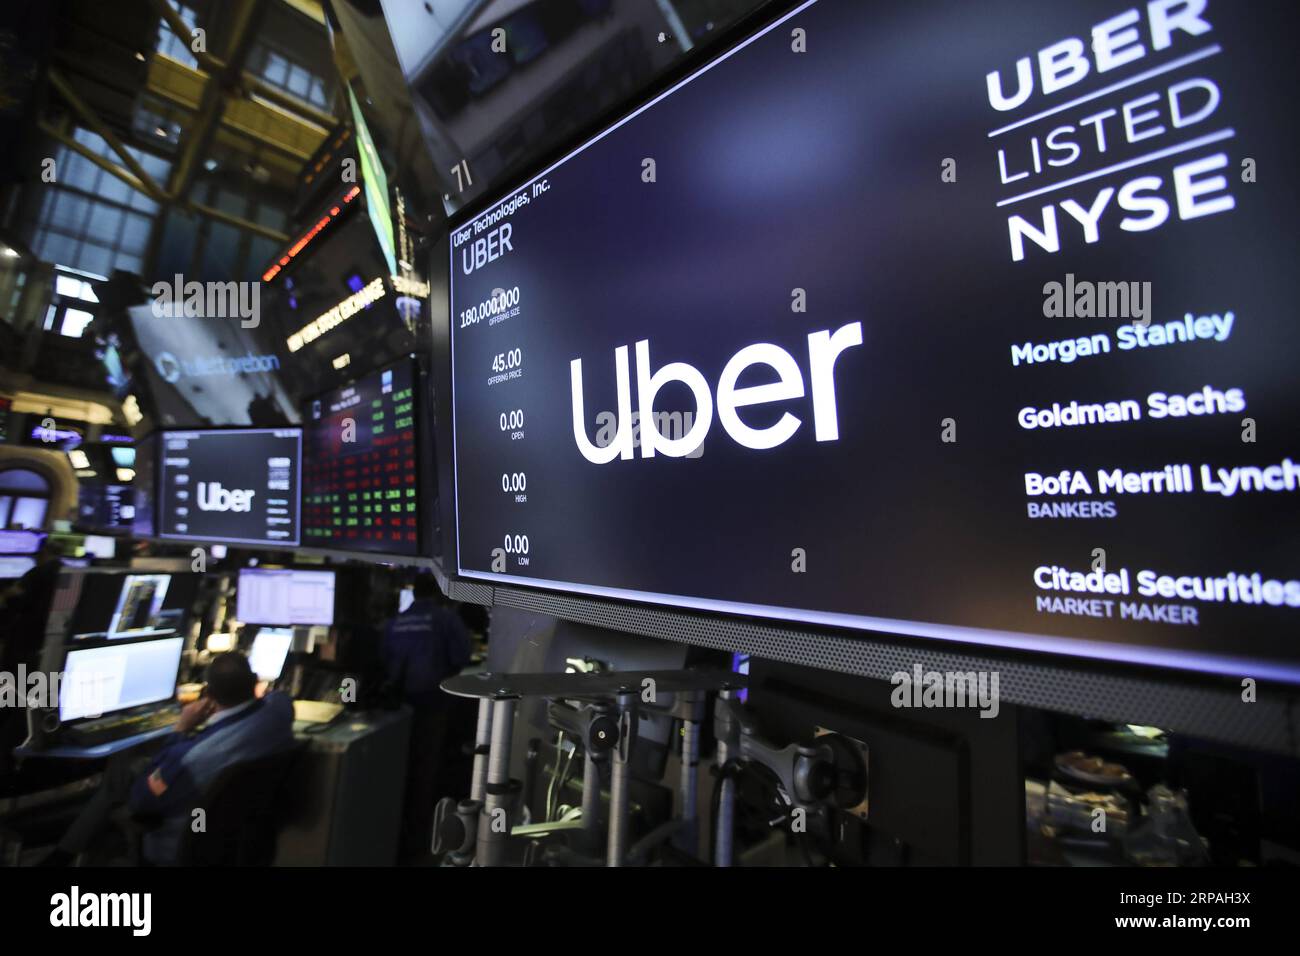 190510 -- NEW YORK, May 10, 2019 Xinhua -- Traders work at the New York Stock Exchange during the initial public offering IPO of Uber Technologies Inc., in New York, the United States, May 10, 2019. U.S. ride hailing company Uber Technologies Inc. began trading on the NYSE on Friday. Xinhua/Wang Ying U.S.-NEW YORK-NYSE-UBER-IPO PUBLICATIONxNOTxINxCHN Stock Photo